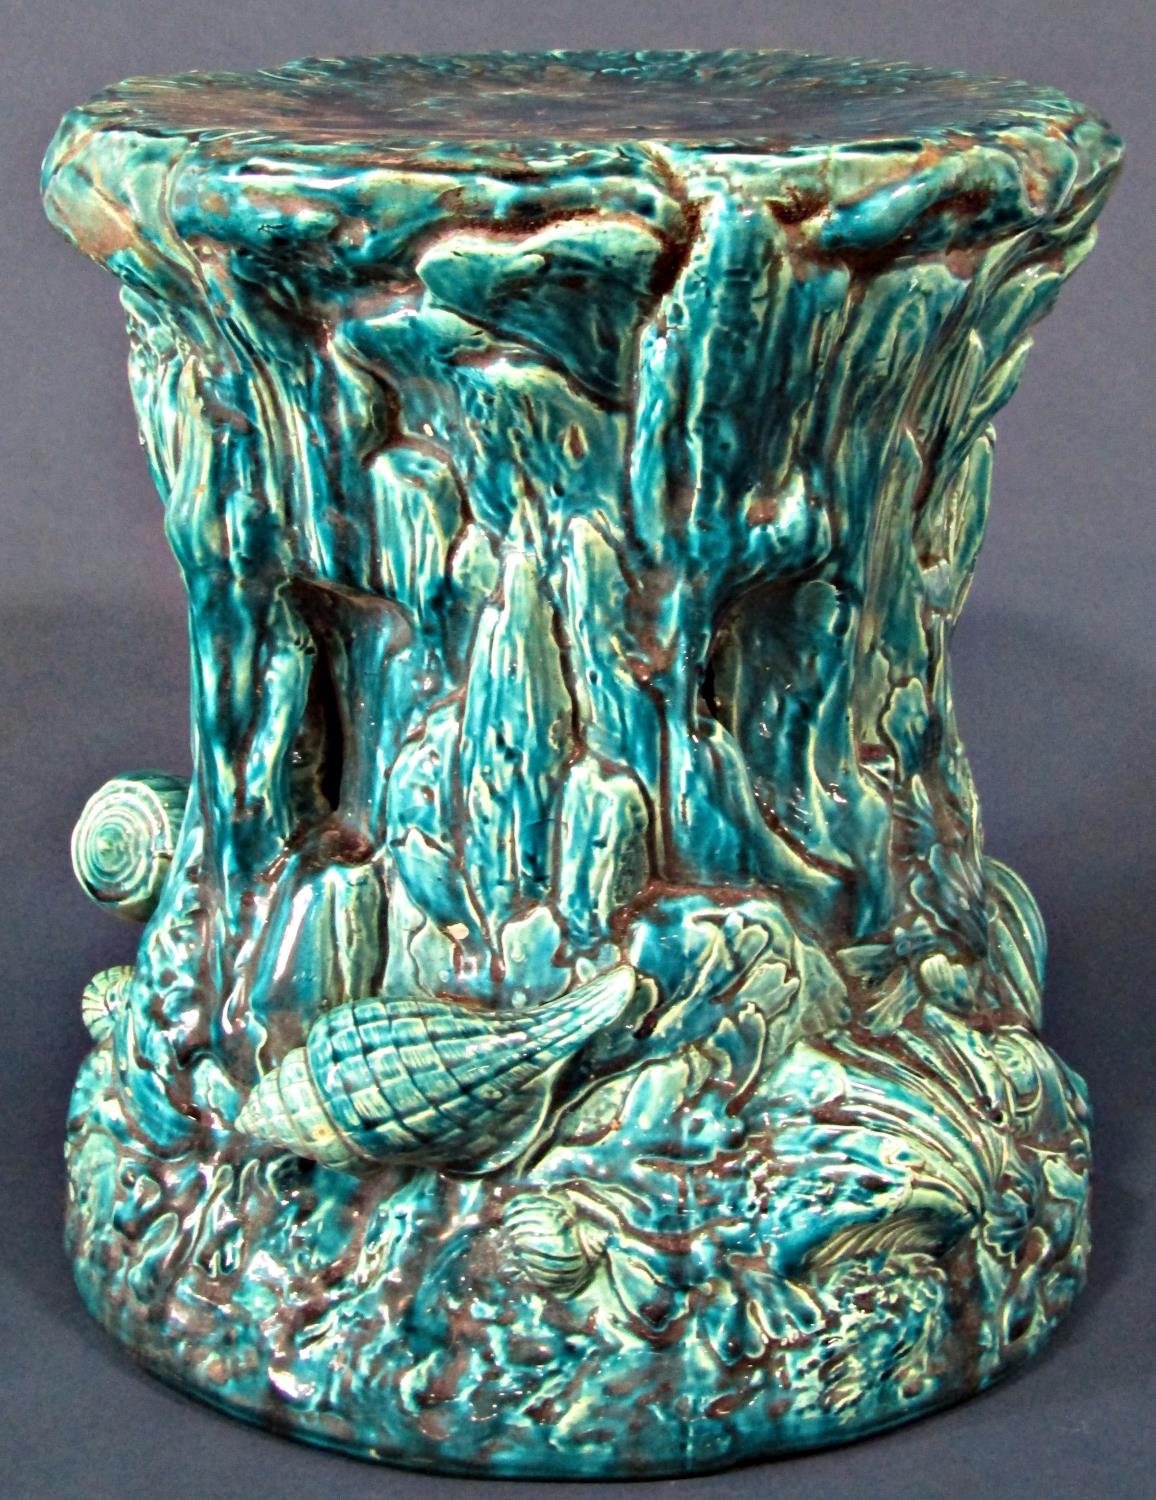 A Bretby ware majolica jardinière stand with marine theme, with shell, weed and other detail, with